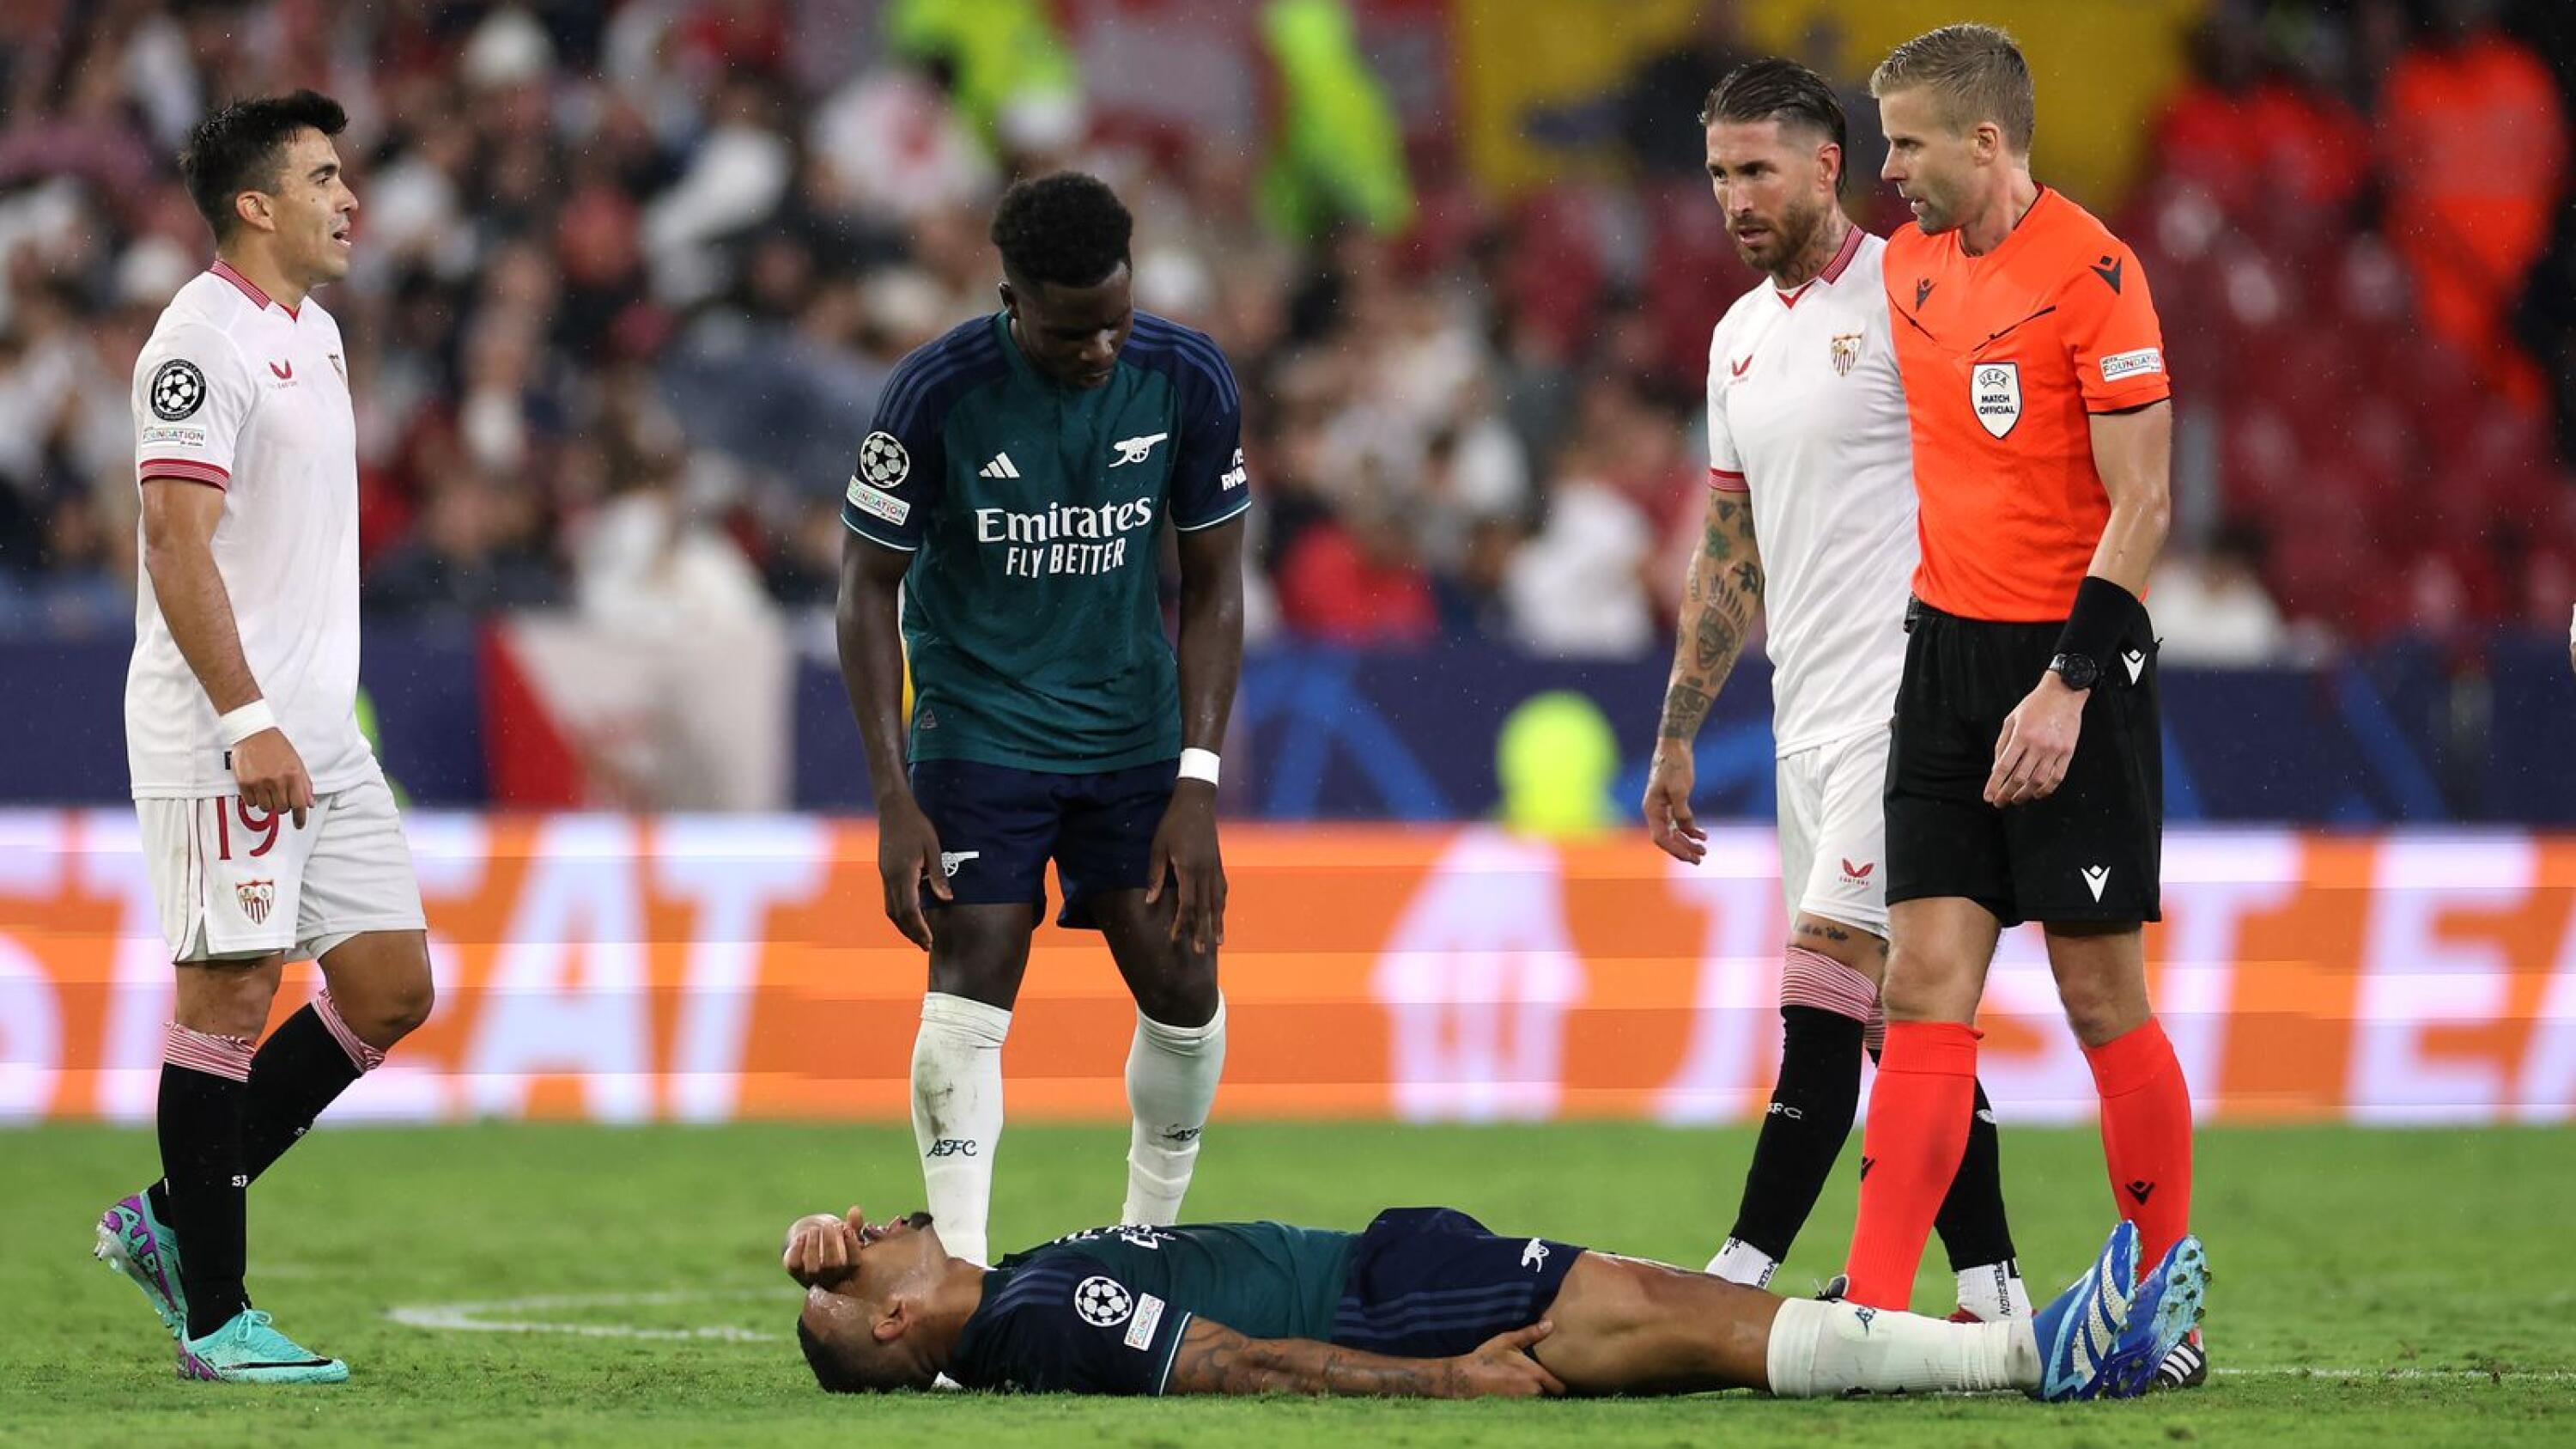  Arsenal’s Gabriel Jesus lays on the pitch after getting injured 